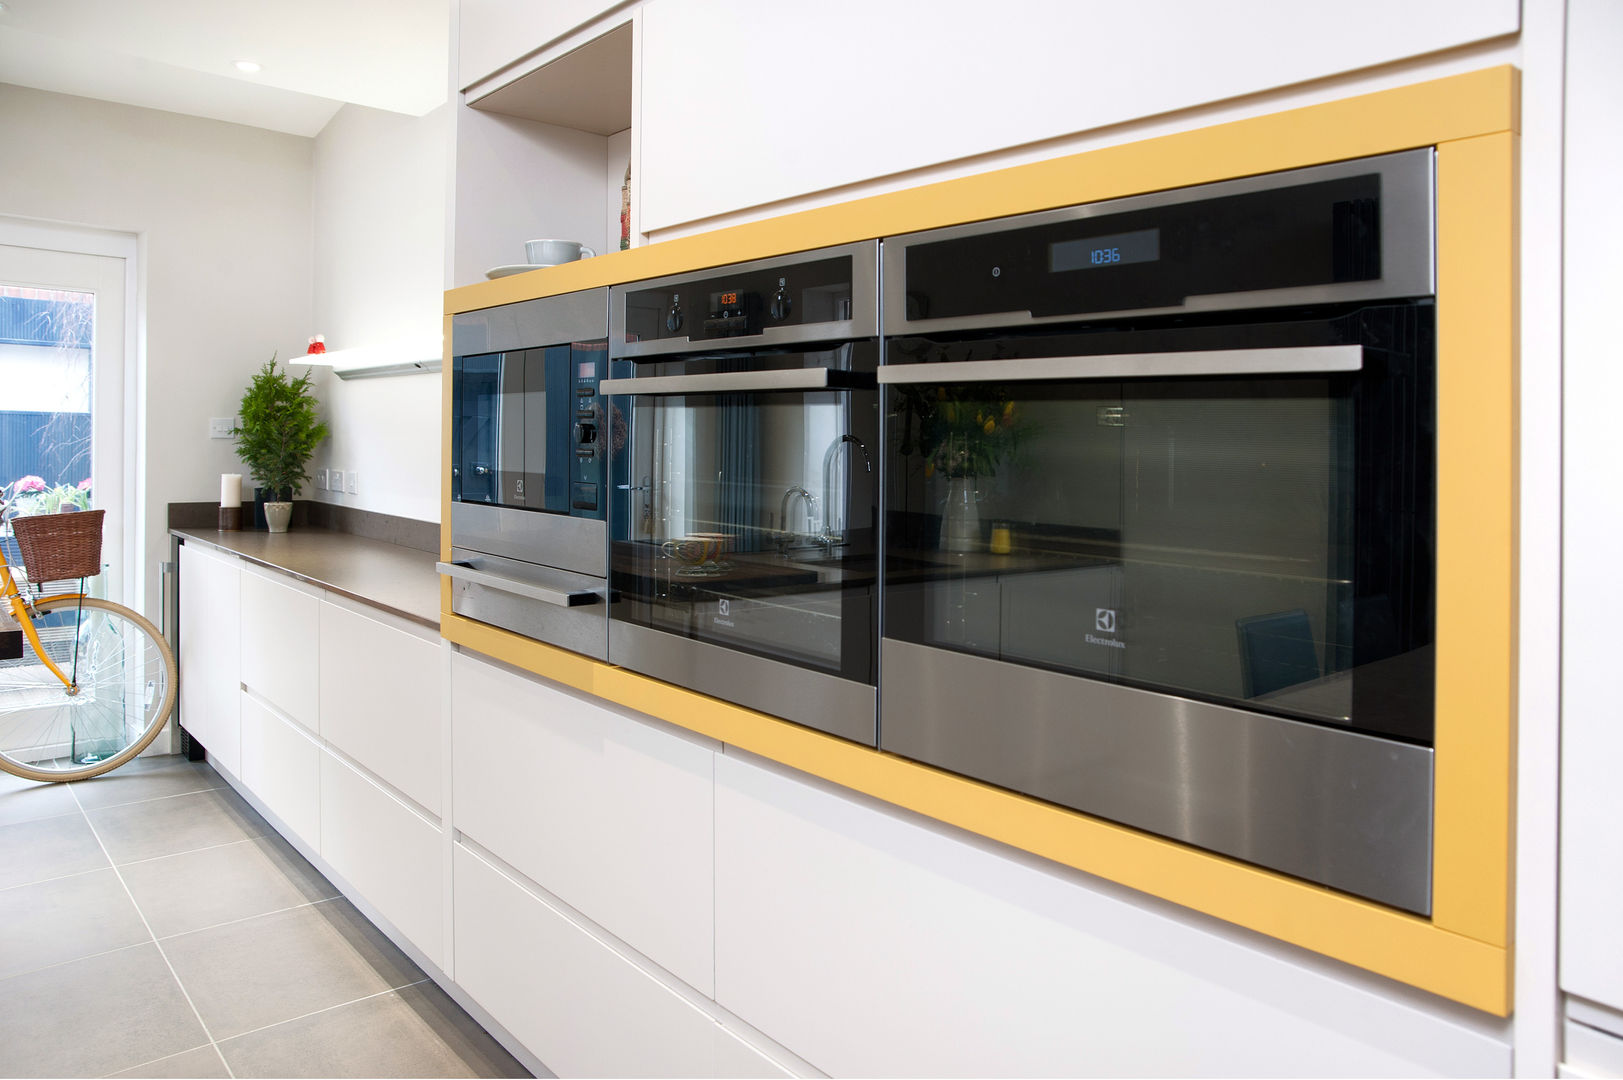 Electrolux appliances wrapped in Curry Yellow panelling Haus12 Interiors Modern kitchen